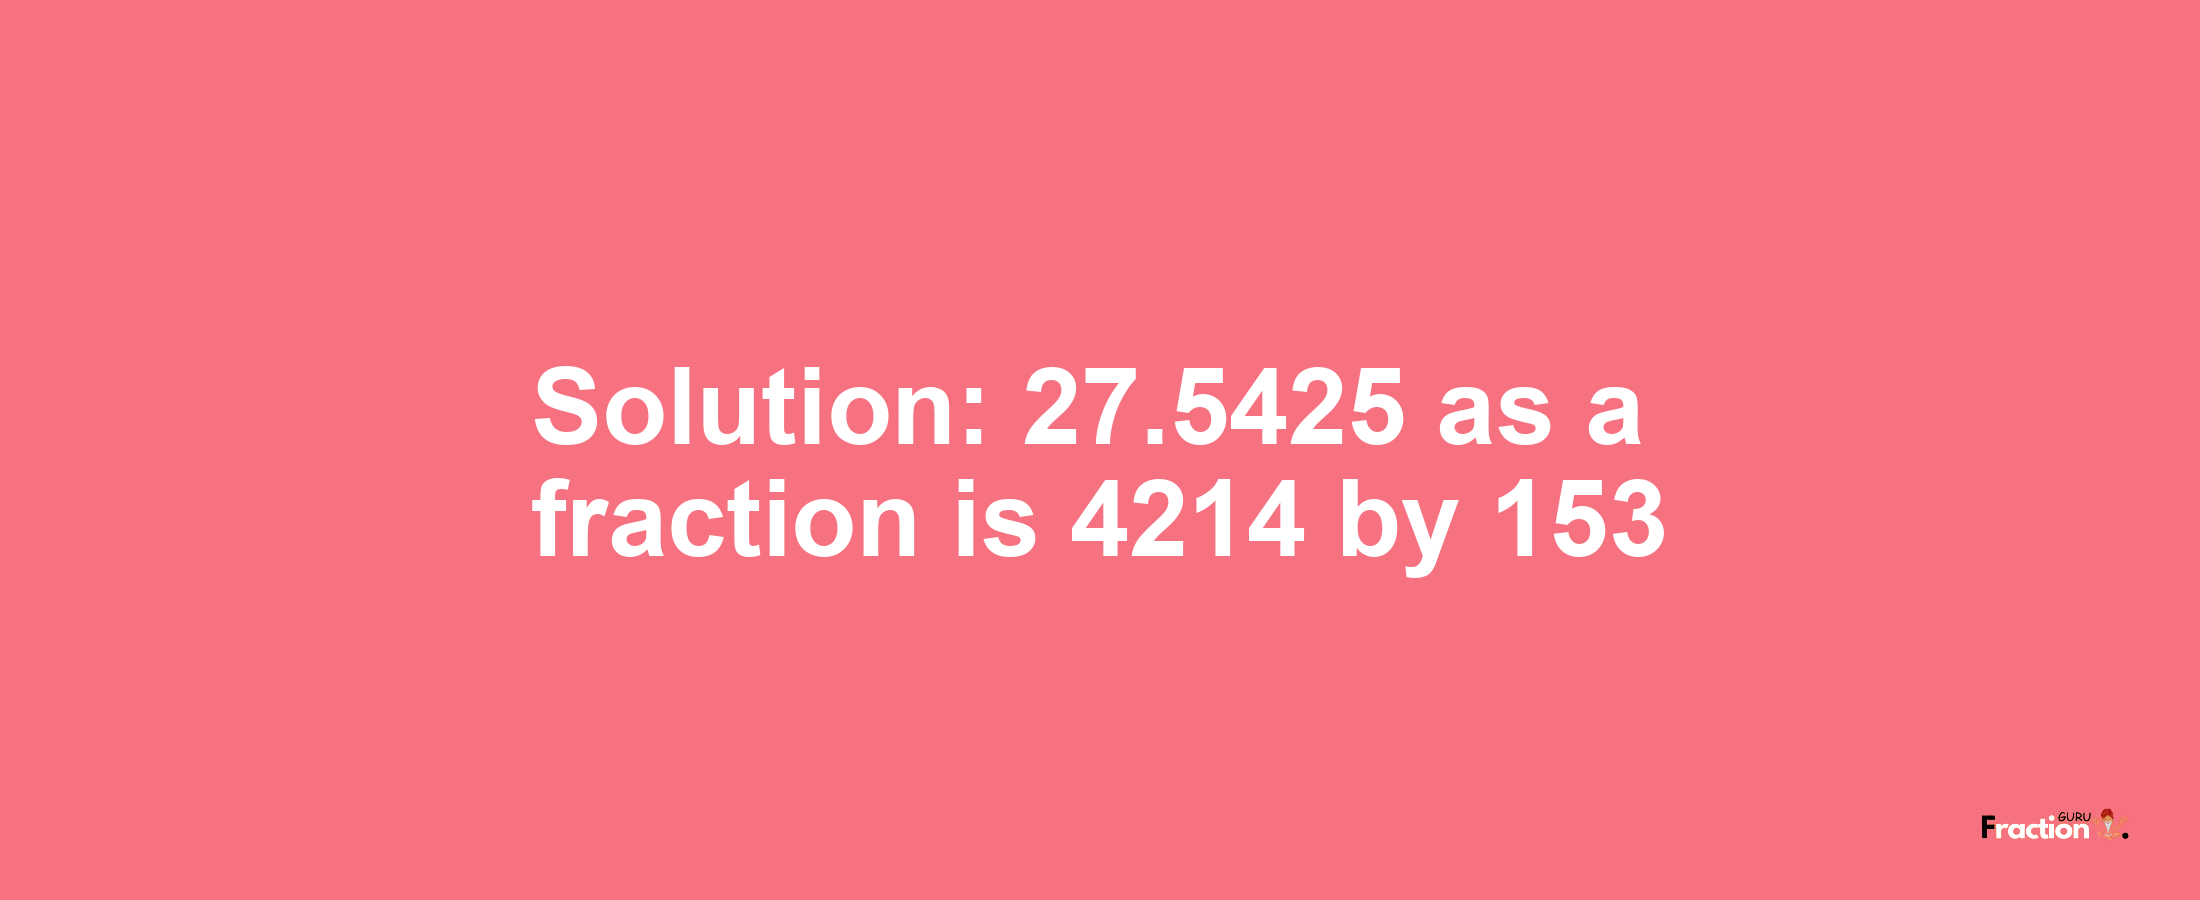 Solution:27.5425 as a fraction is 4214/153